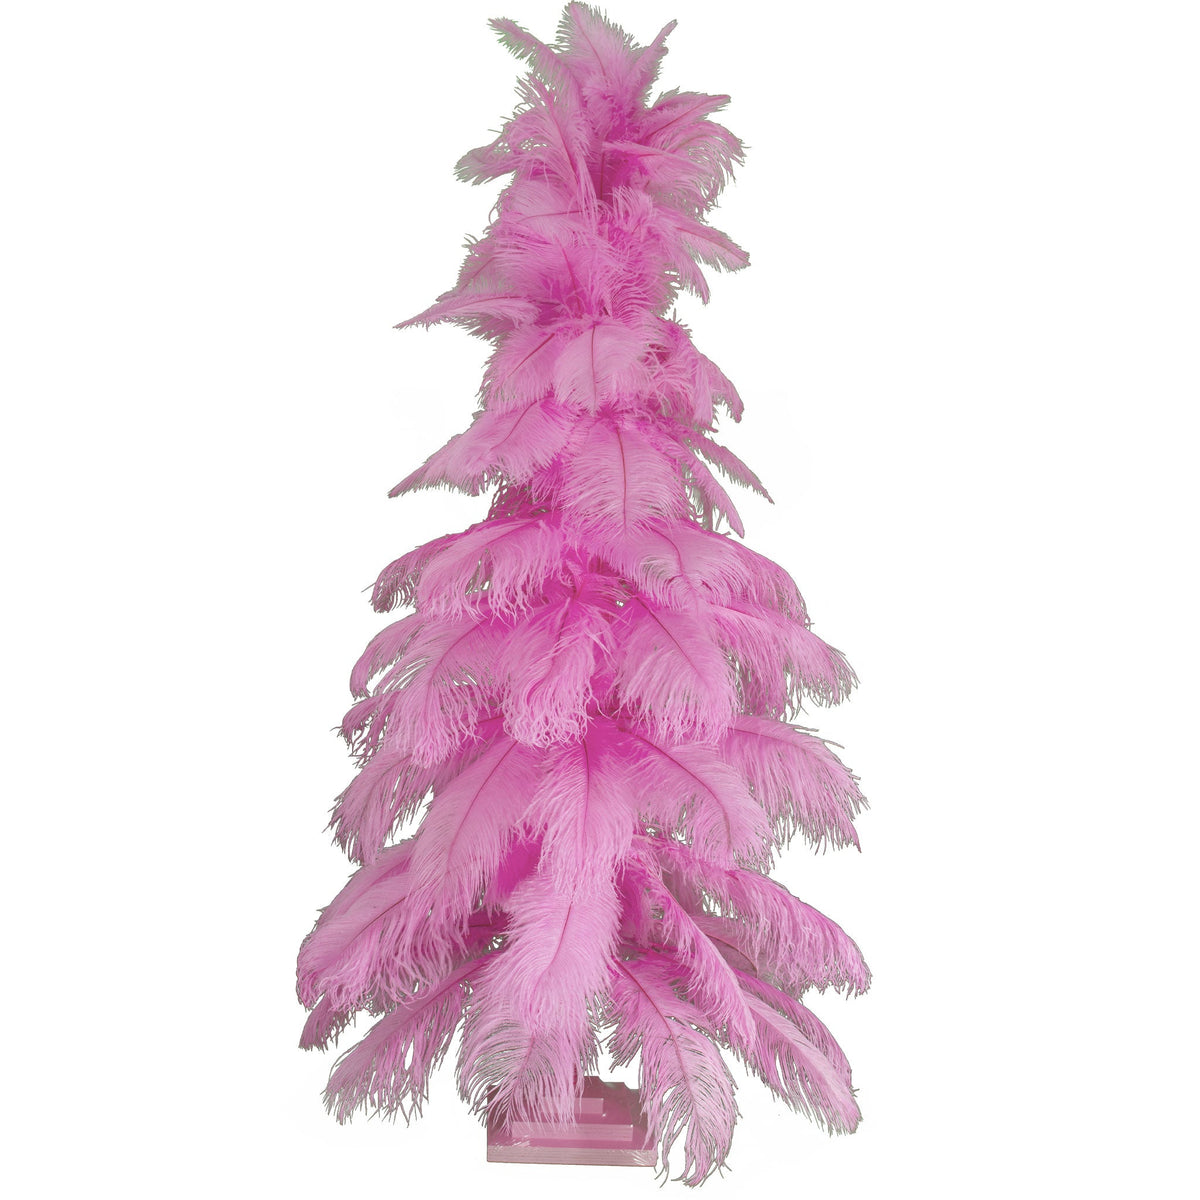 Introducing Lee Display's brand new 4FT Tall Pink Ostrich Feather Christmas Trees! Made with real ostrich feathers